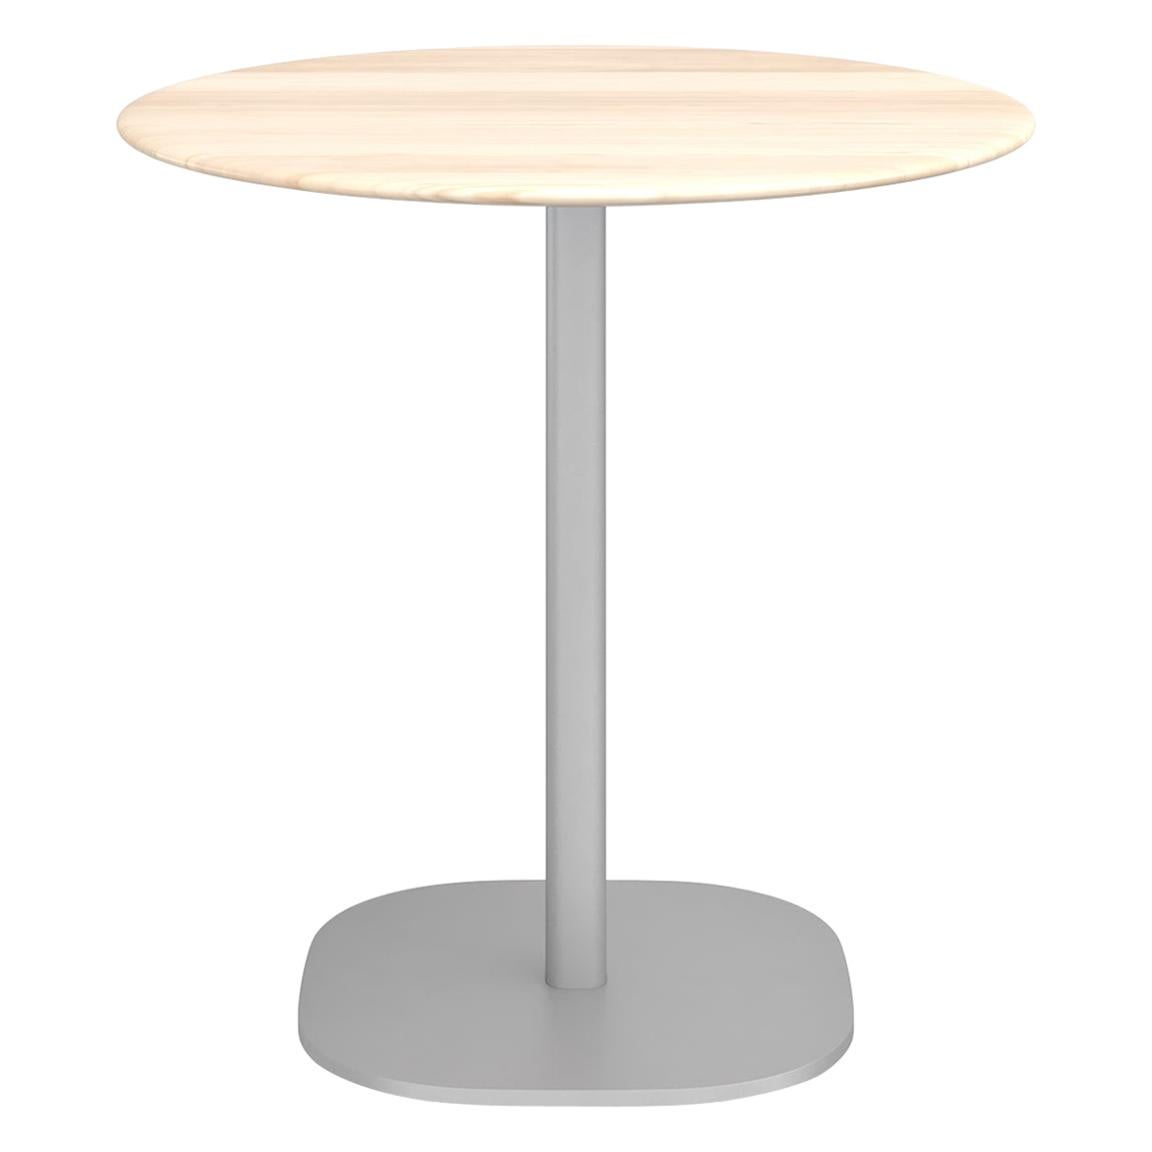 Emeco 2 Inch Large Aluminum Round Cafe Table with Wood Top by Jasper Morrison For Sale